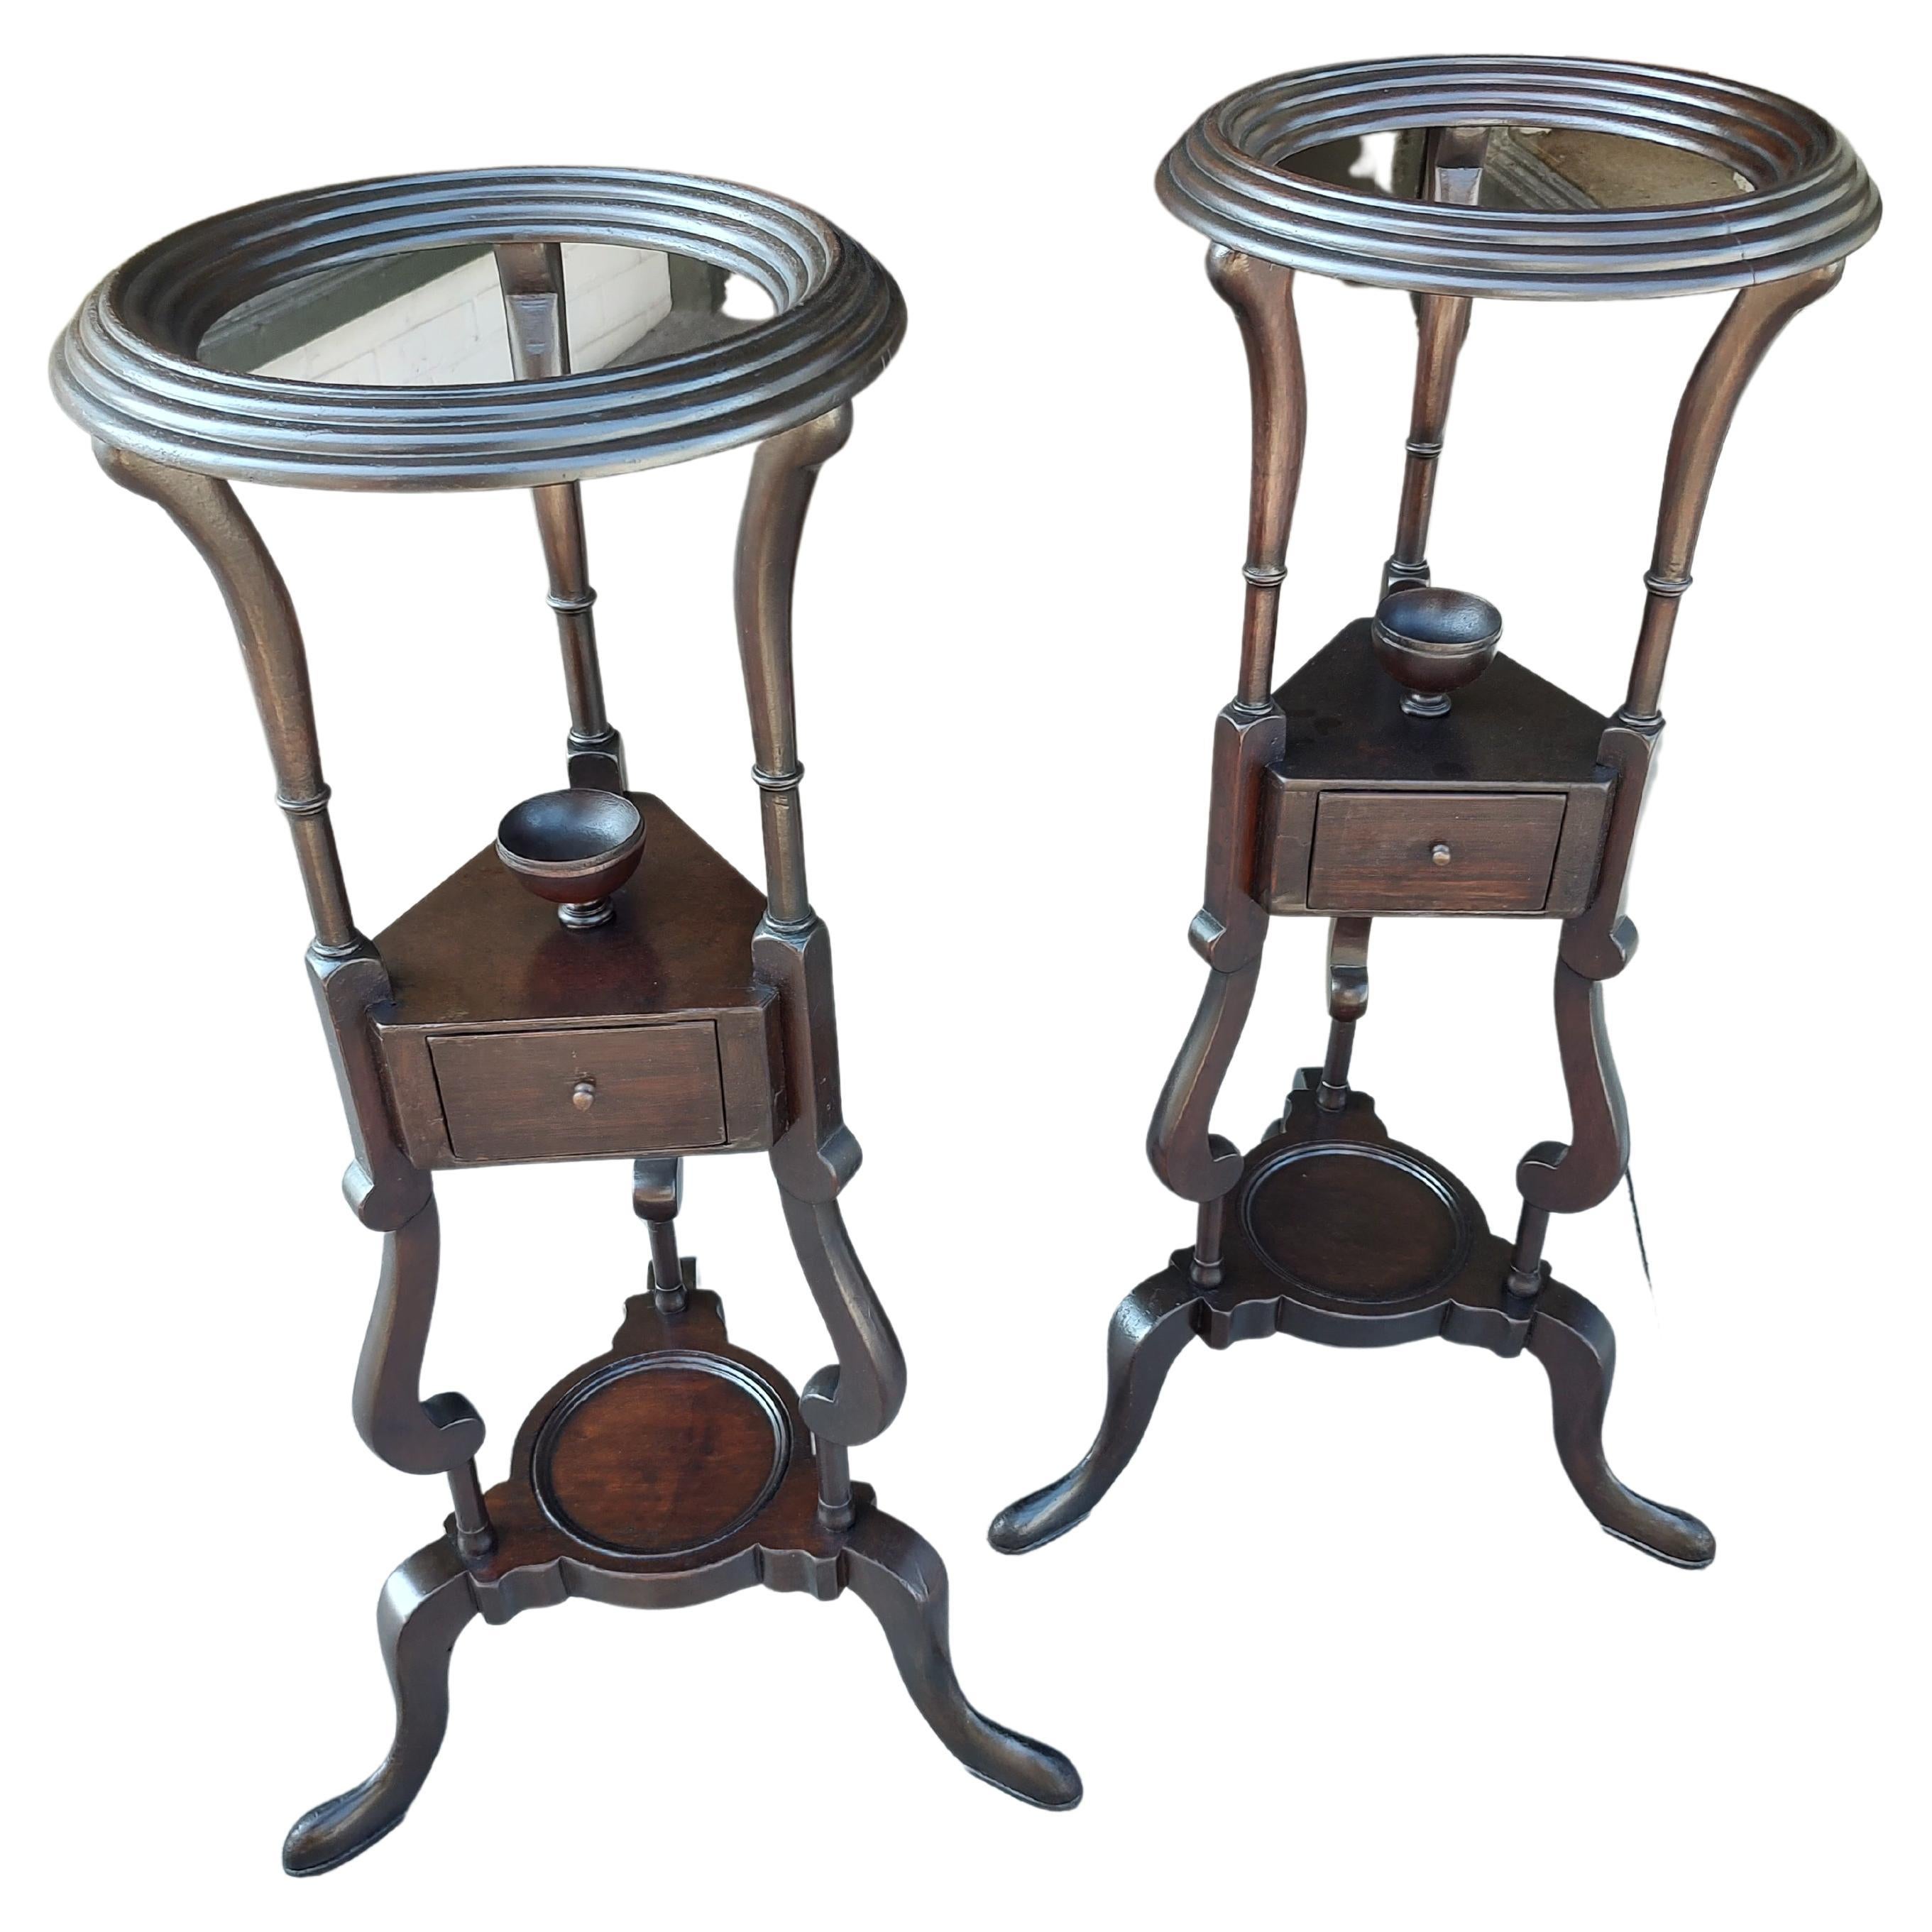 Pair of Early 20thc Mahogany Plant Stands with Drawers & Copper Pots